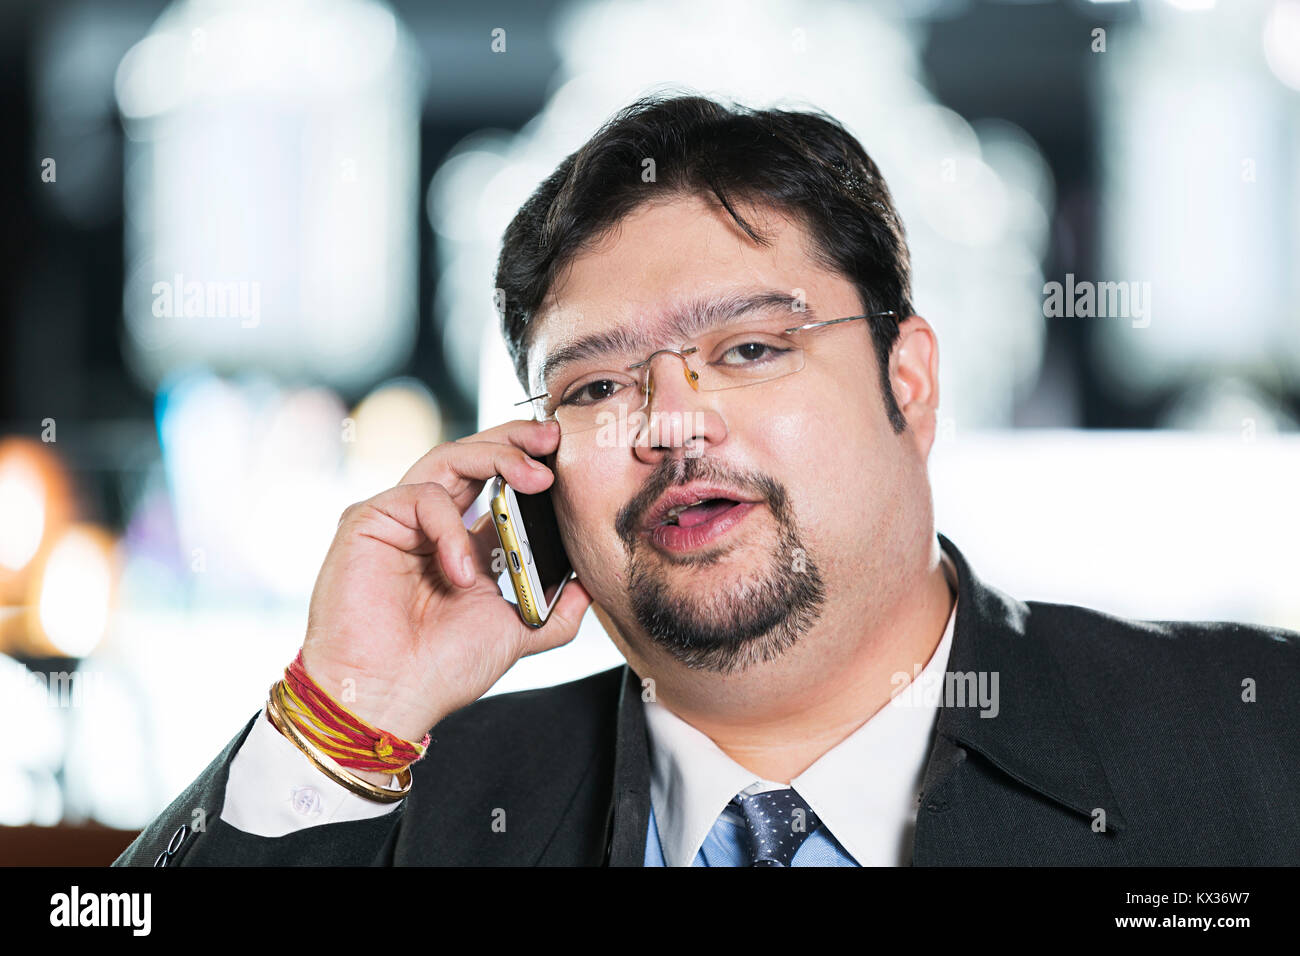 Close-Up One Business Male Talking On Cell Phone Smiling Stock Photo